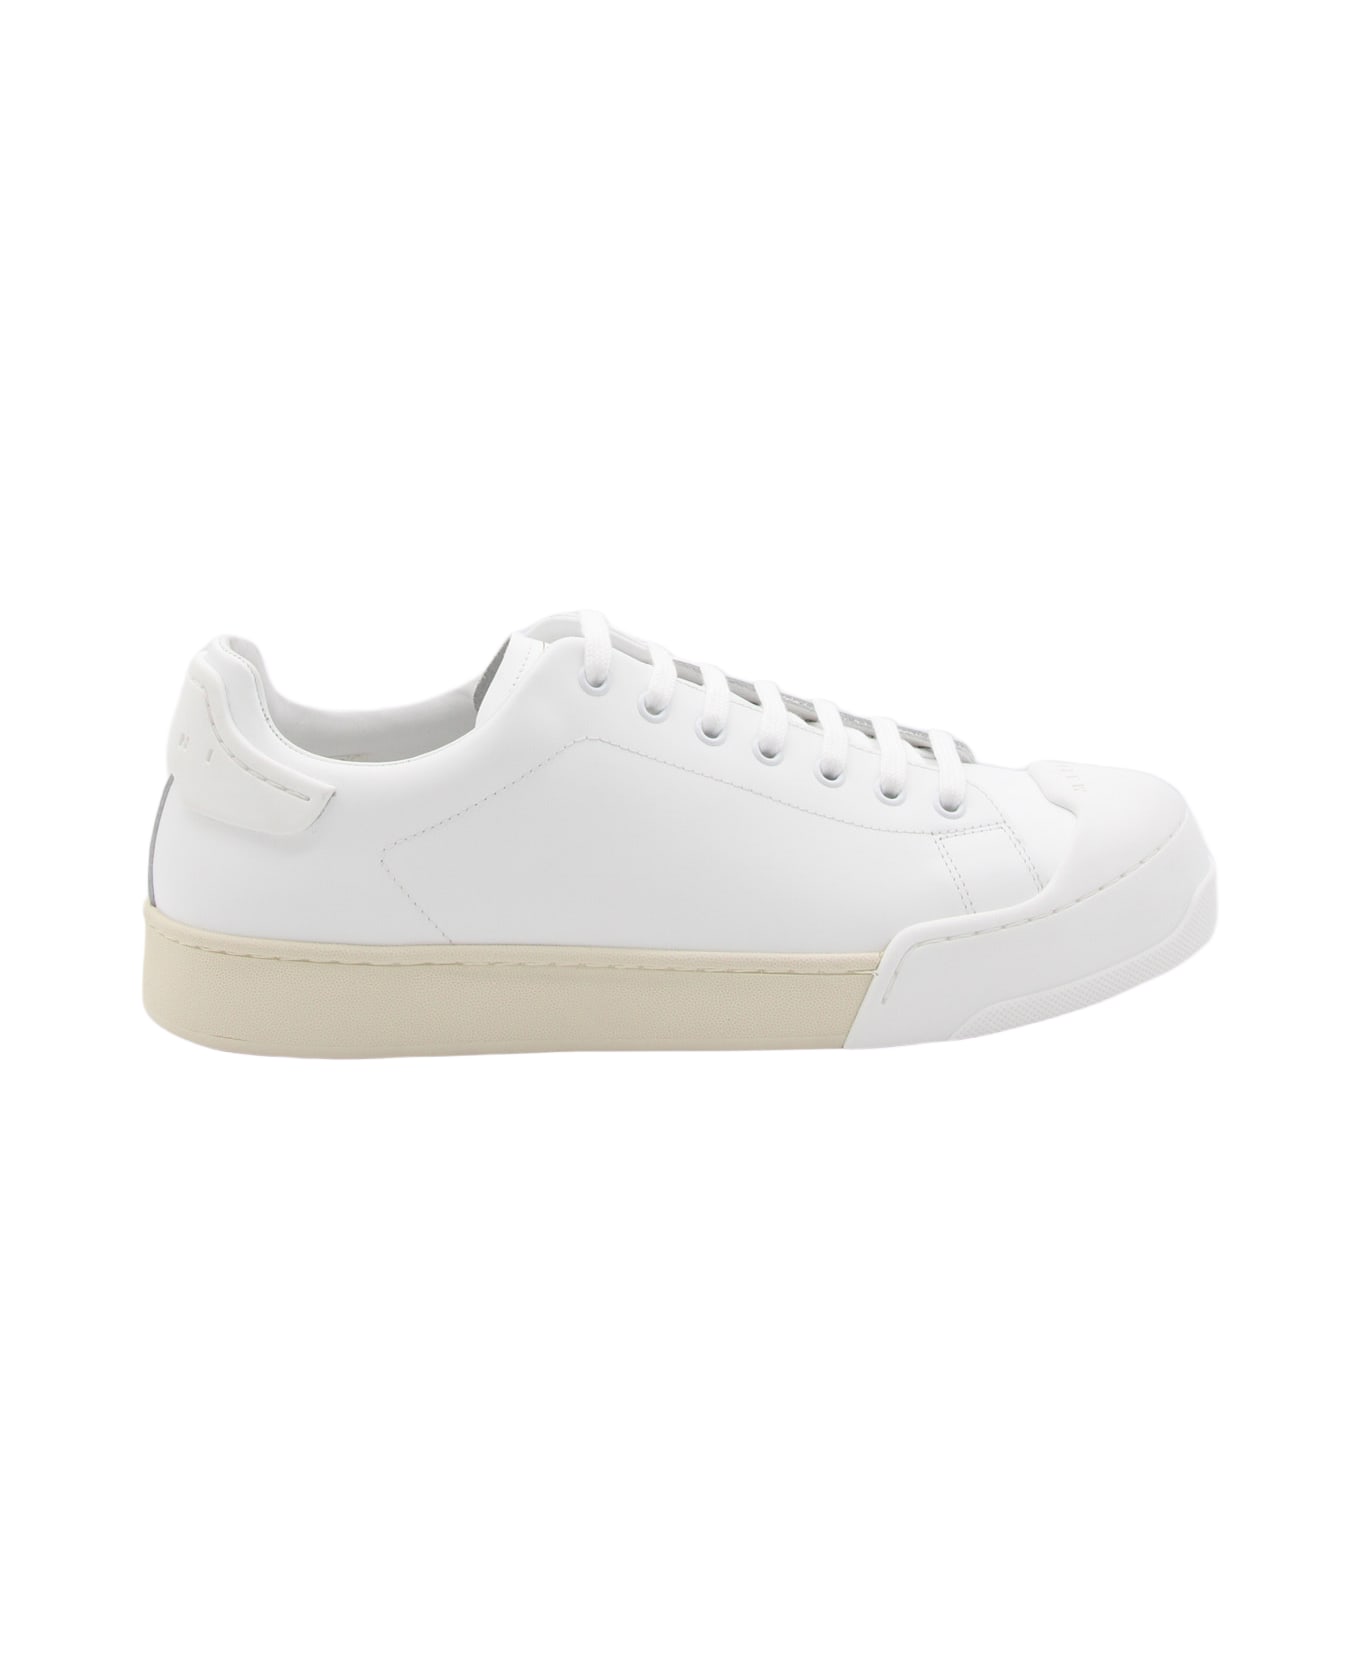 Marni White Leather Sneakers - LILY WHITE/LILY WHITE スニーカー